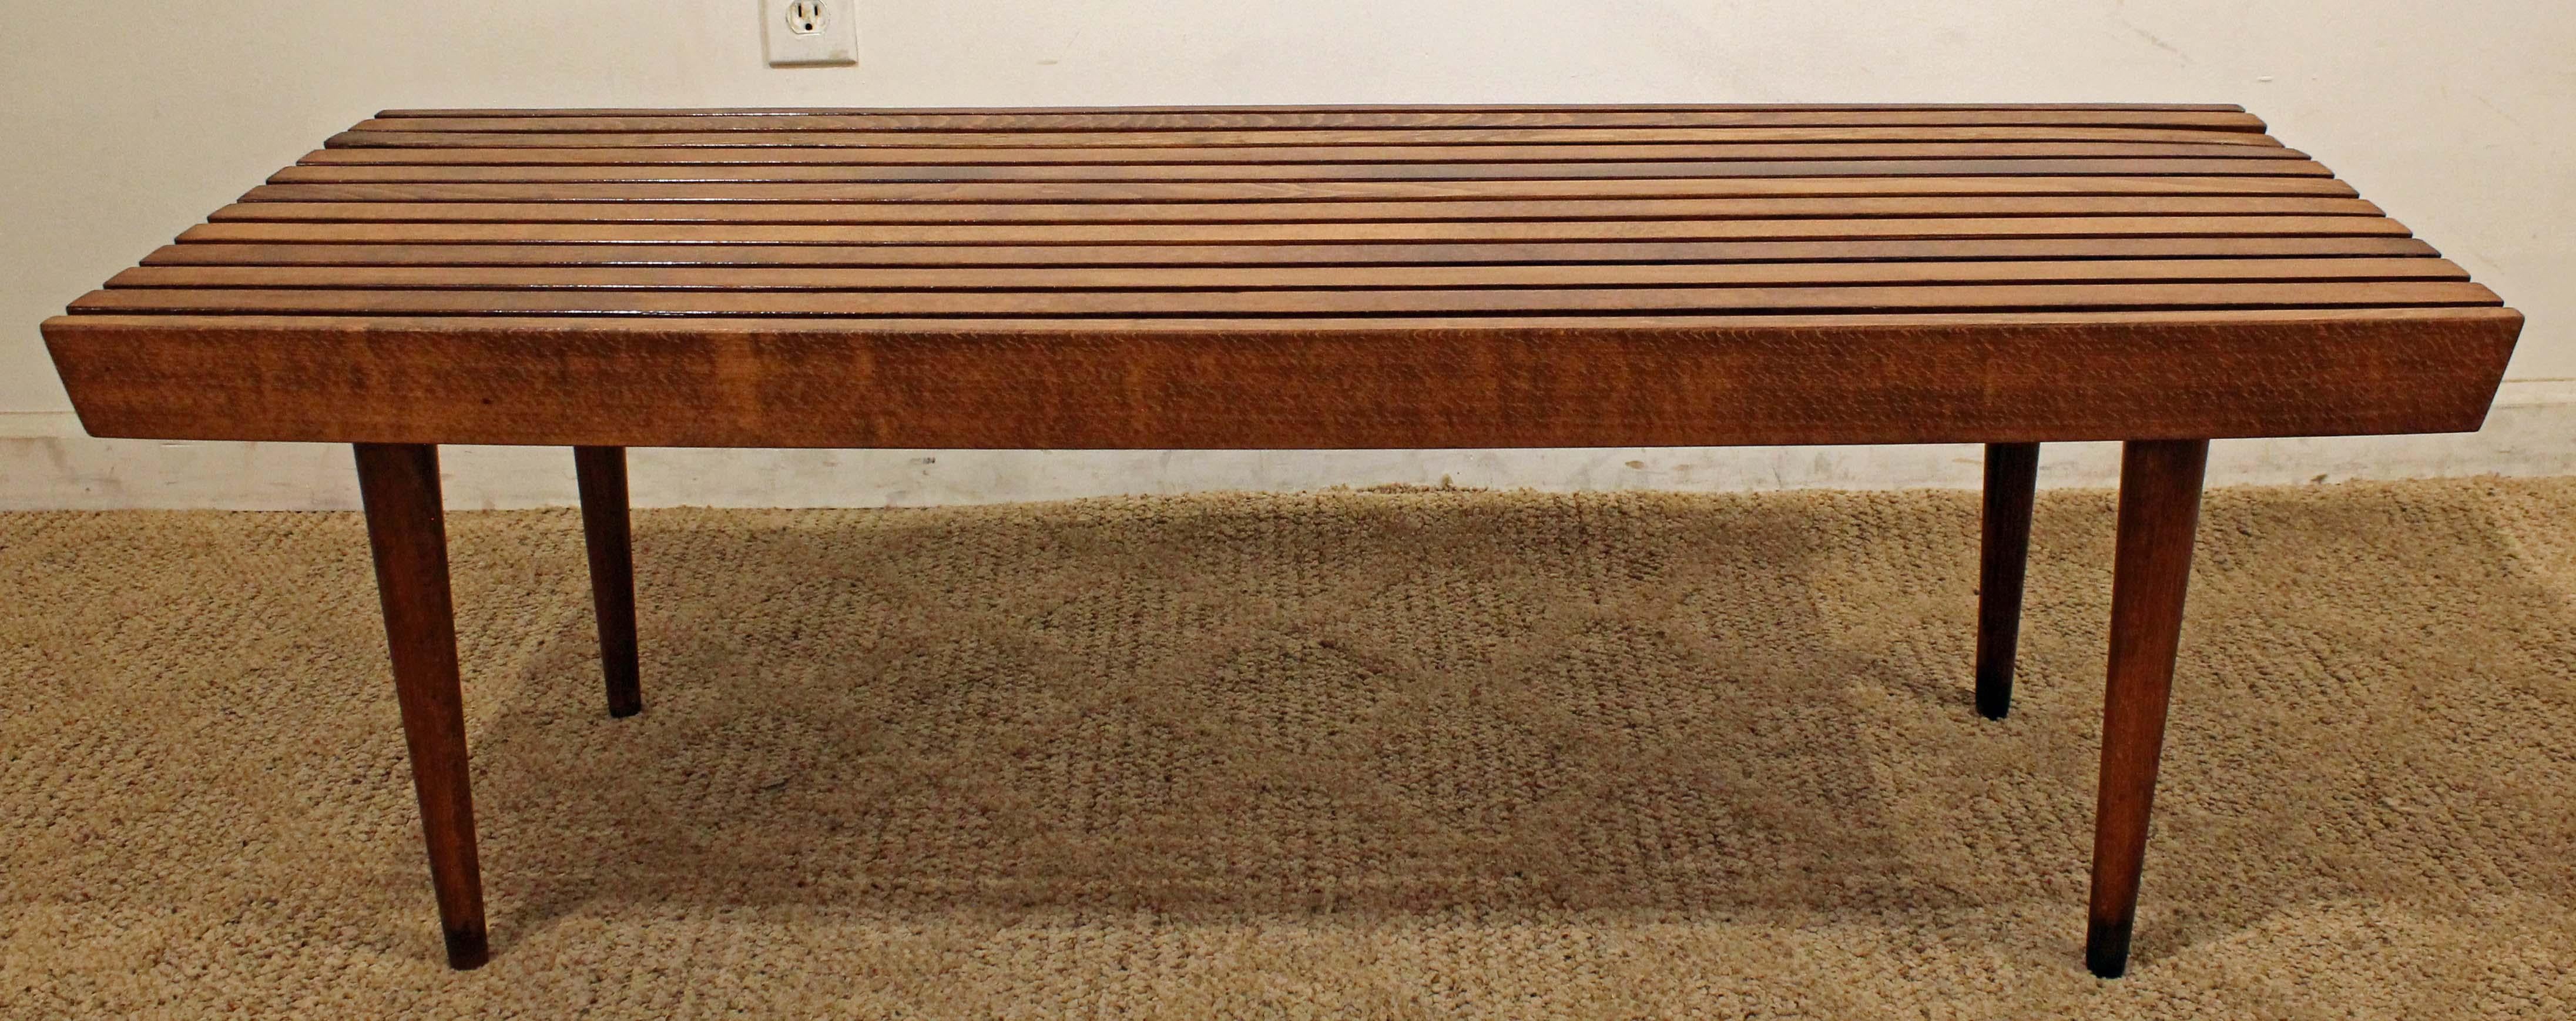 What a find. Offered is a midcentury coffee table. Features a slat bench top on pencil legs, made of walnut. The piece is in good condition, shows minor age wear. It is not signed.

Dimensions: 
48